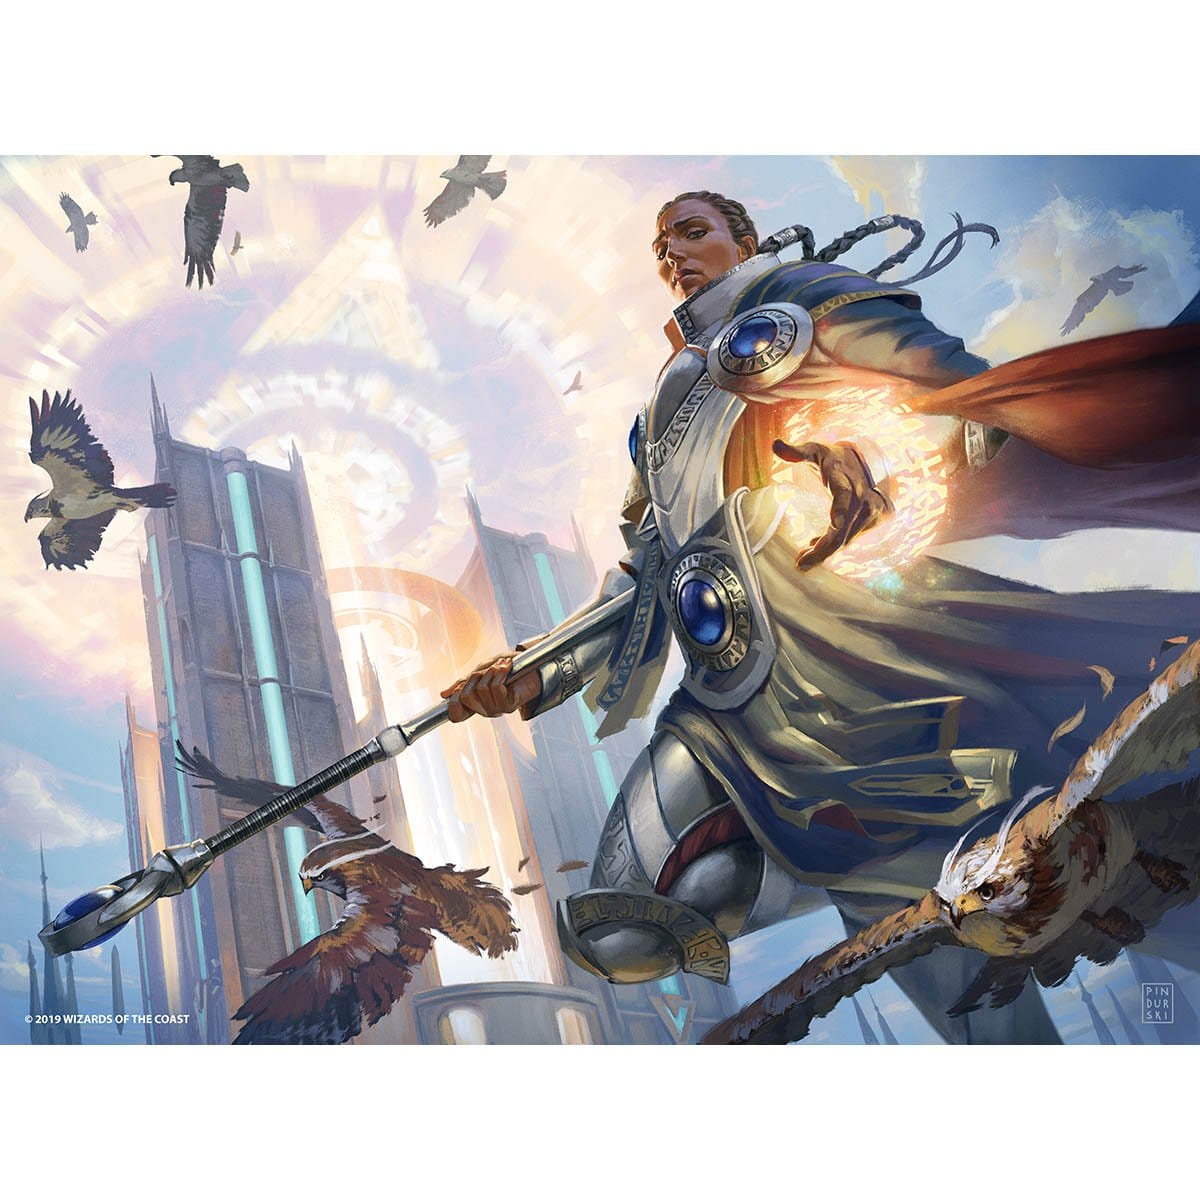 Elite Guardmage Print - Print - Original Magic Art - Accessories for Magic the Gathering and other card games